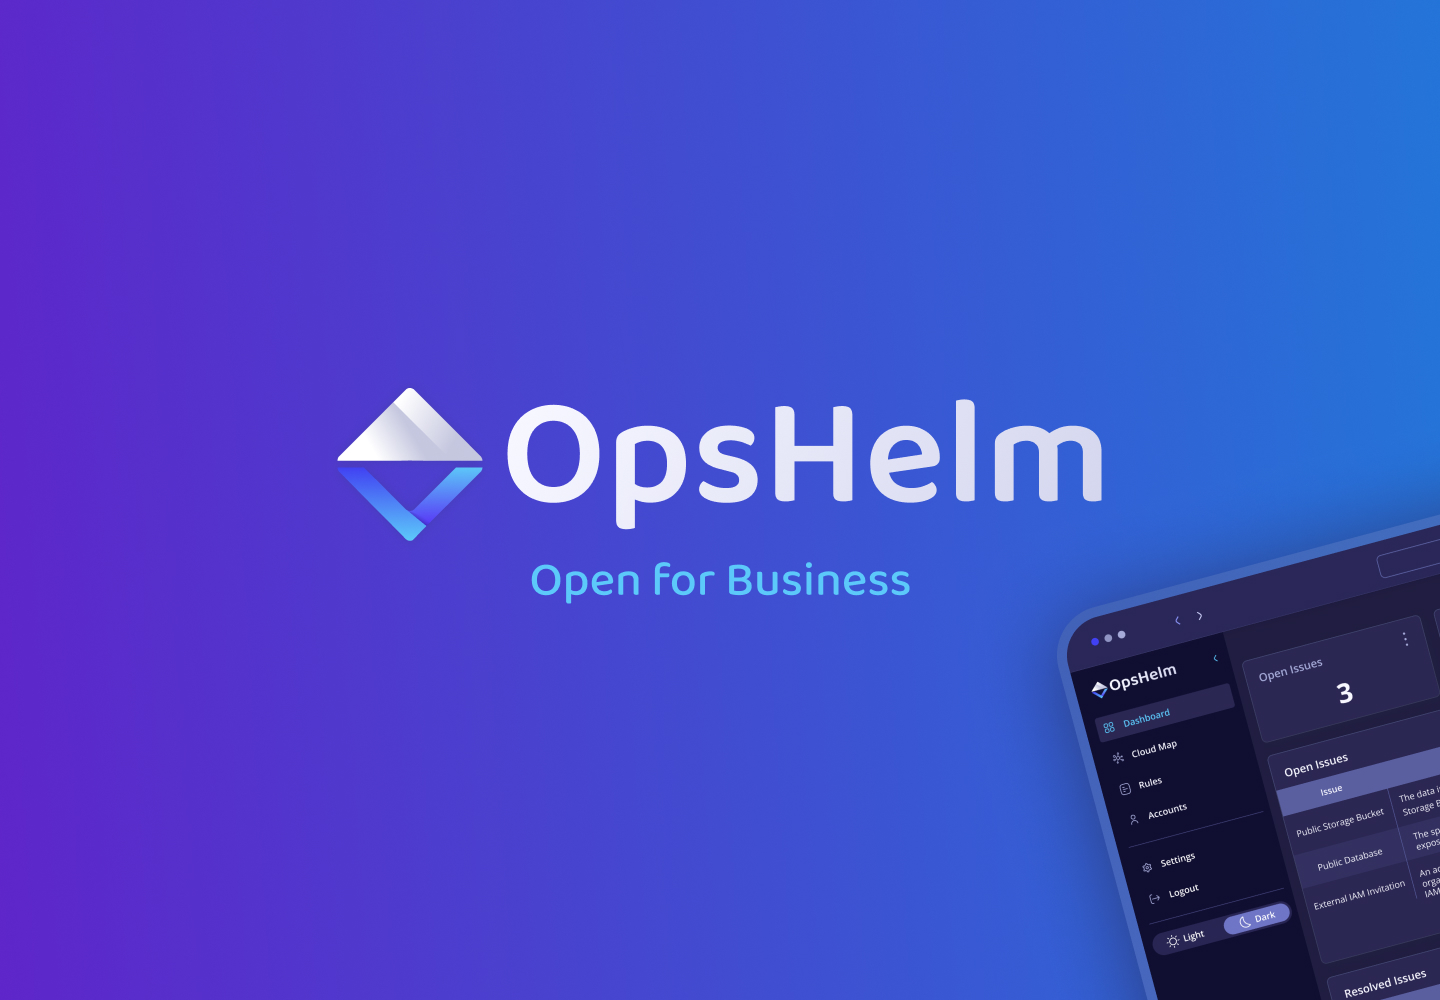 OpsHelm Emerges Out of Stealth to Automate Security Remediation, Make Certain Classes of Security Threats Impossible